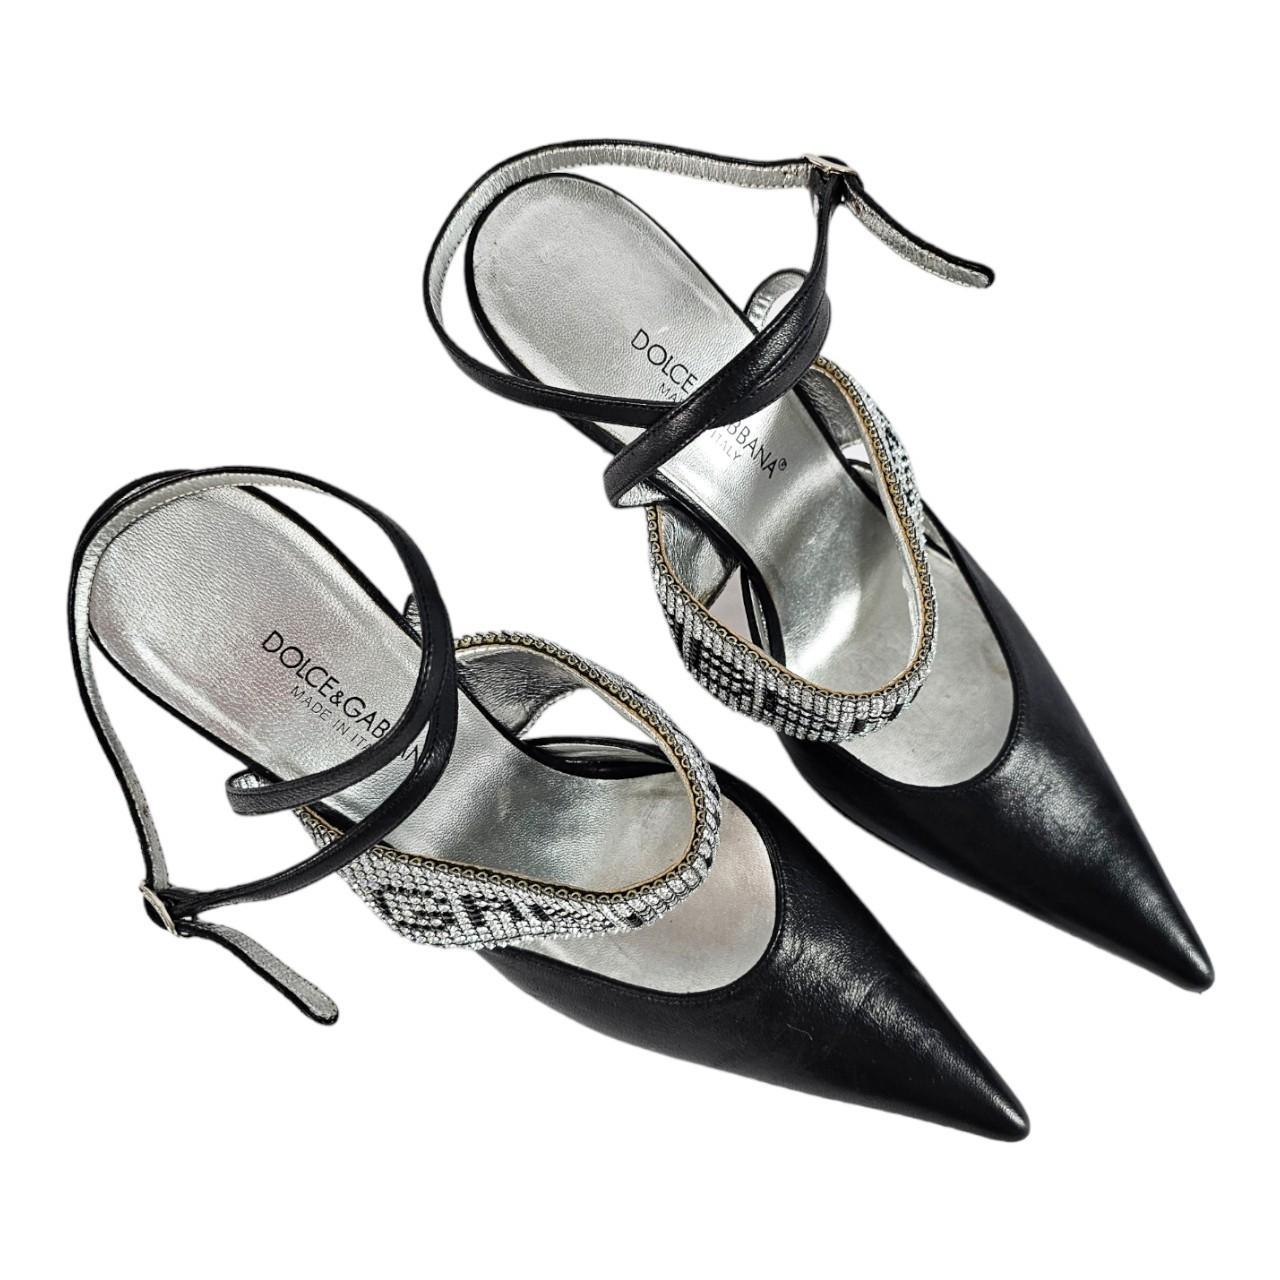 Dolce & Gabbana Women's Black and Silver Courts - 4